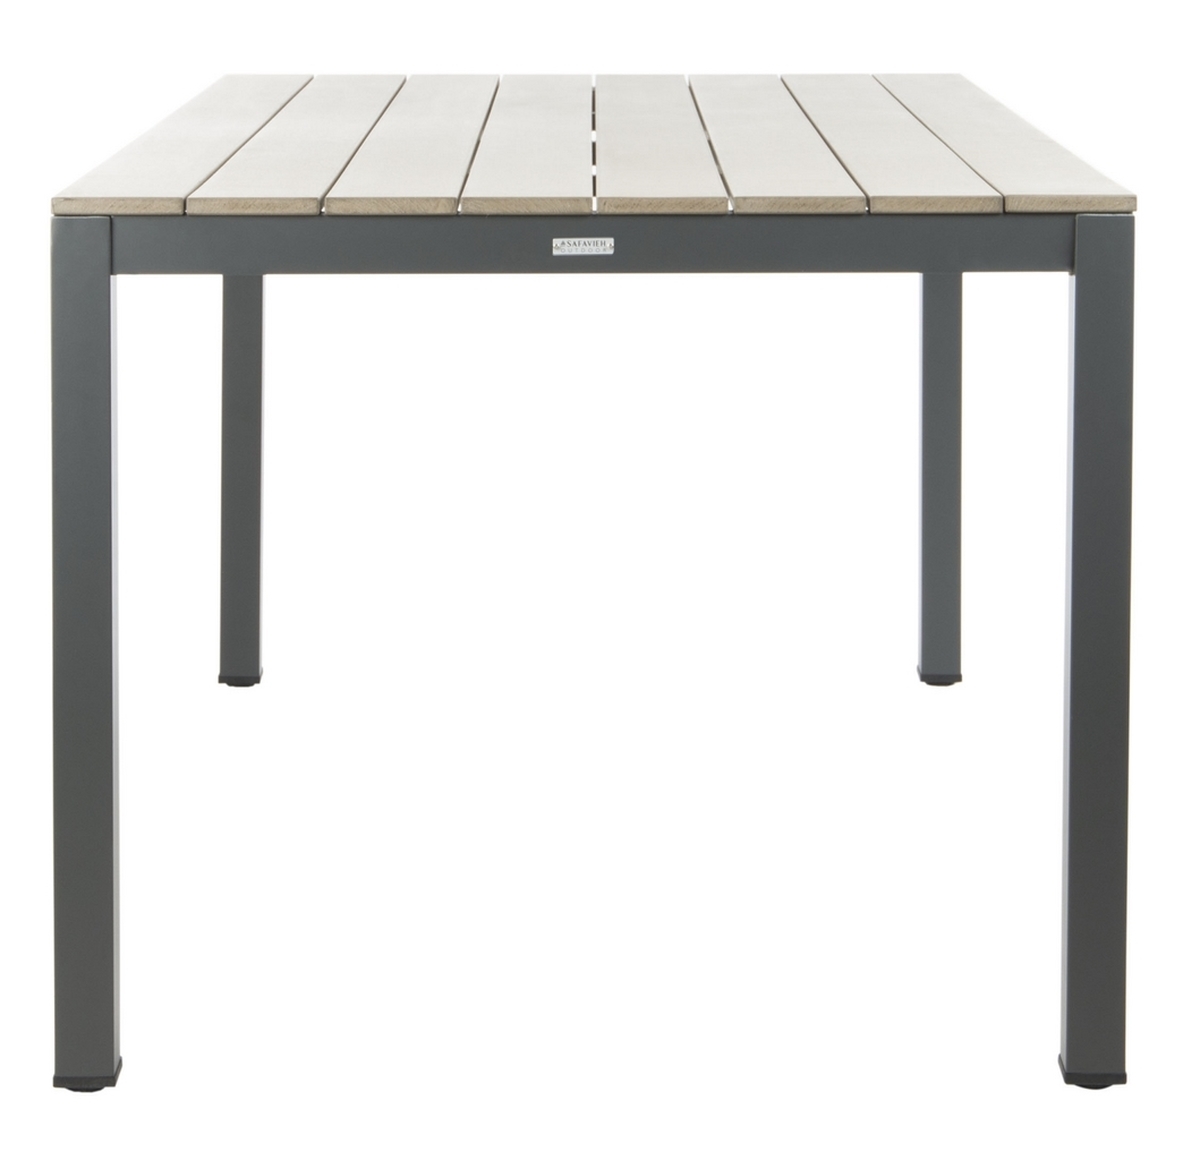 Beldan Dining Table - Distressed Taupe - Arlo Home - Image 2